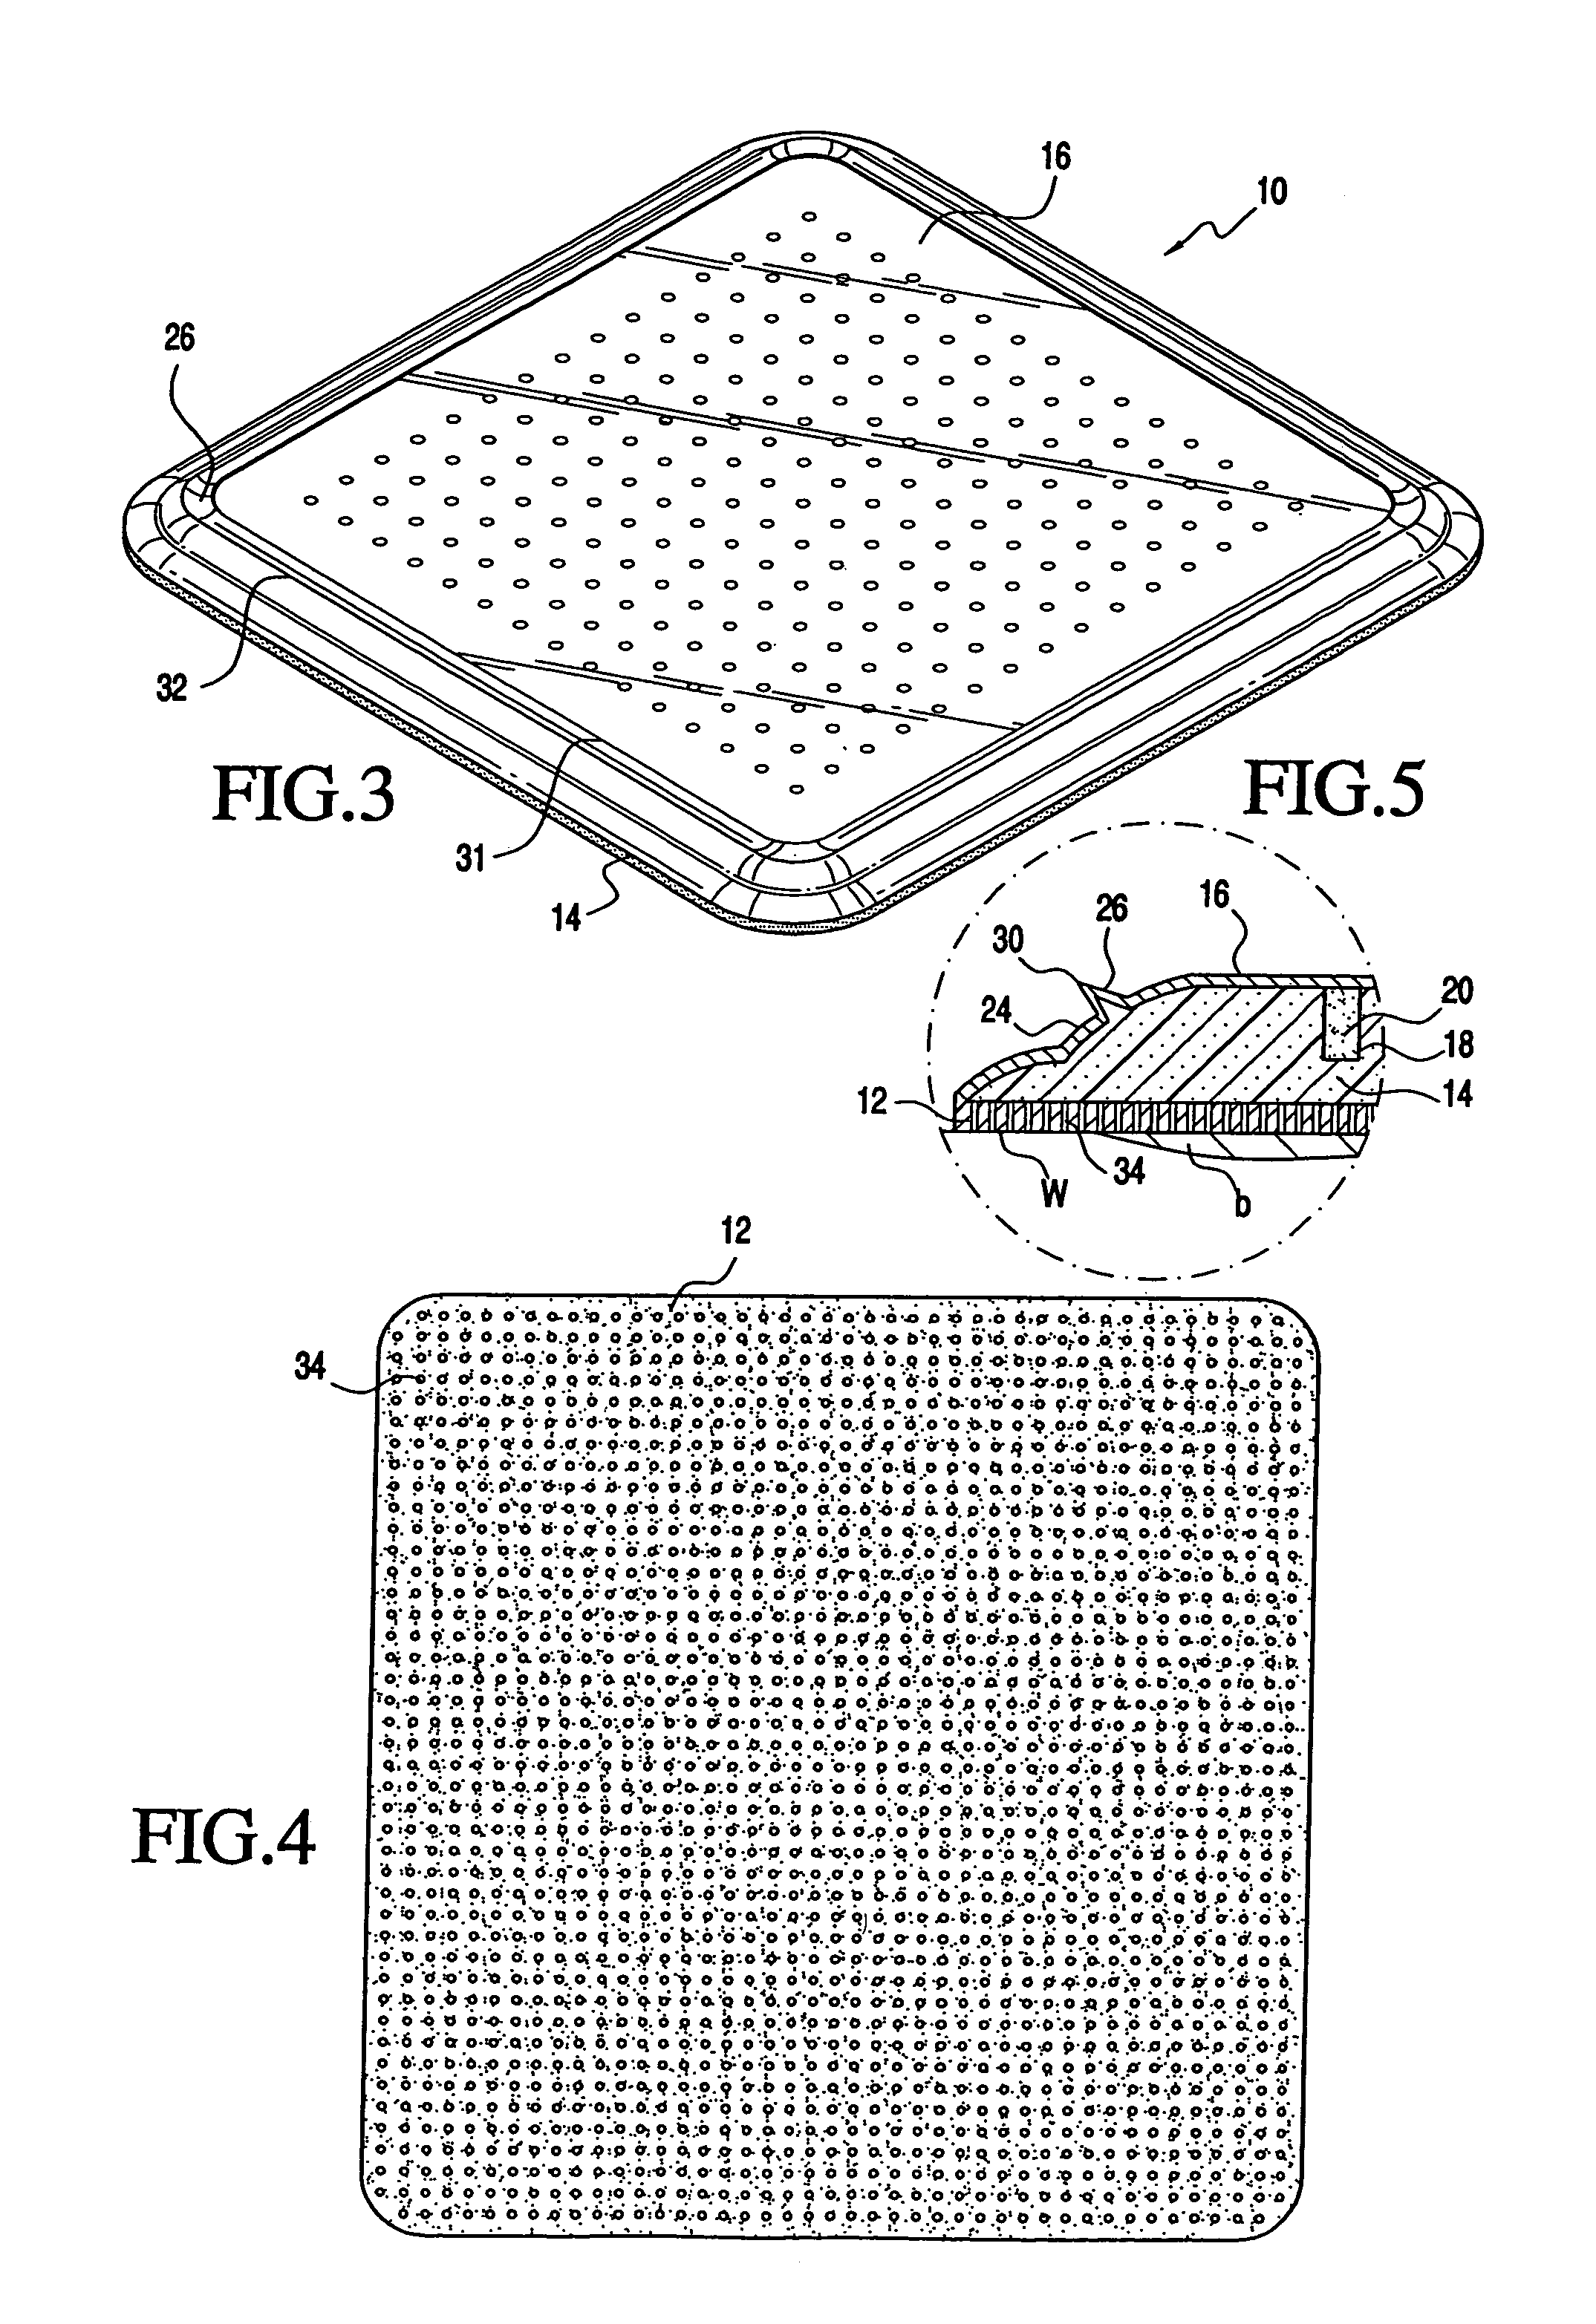 Method for producing a wound dressing